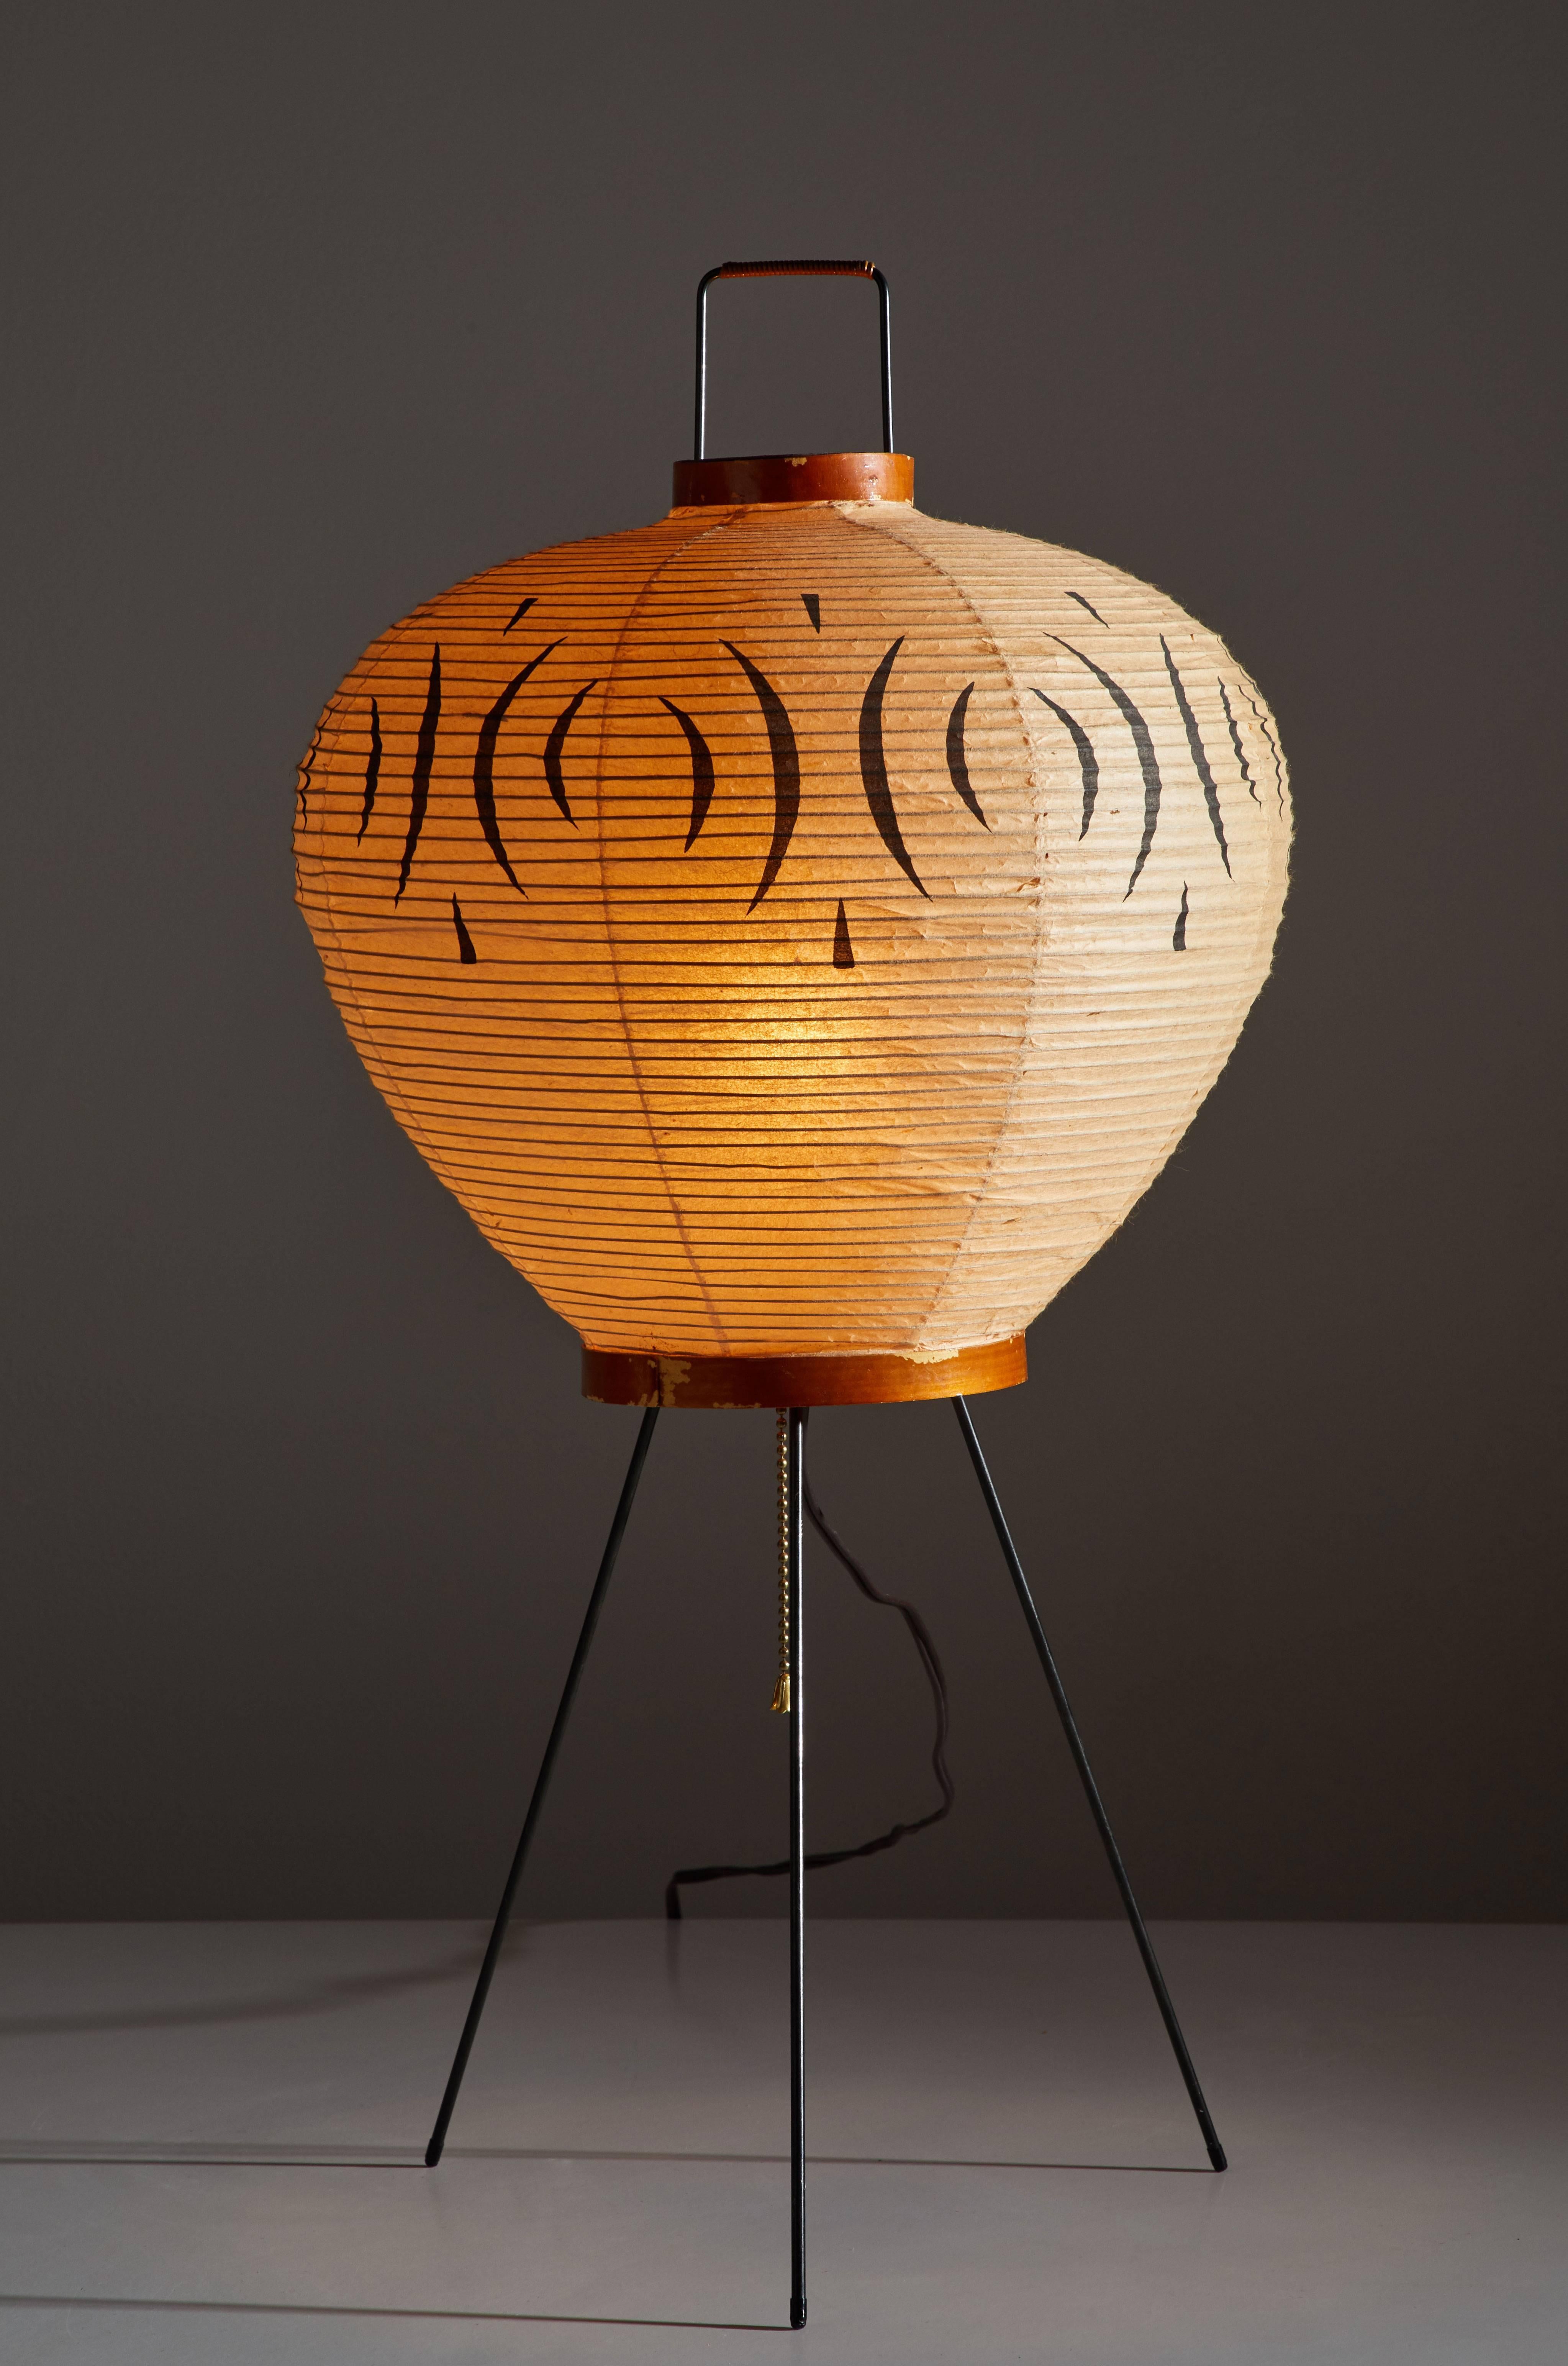 Rare, original model 3A table lamp by Isamu Noguchi for Akari. Designed in Japan, early 1950s. Rice paper, wood and metal handle and legs. Retains the original sun, moon Noguchi stamp. Comes in the original Akari box. Original hand-painted design to